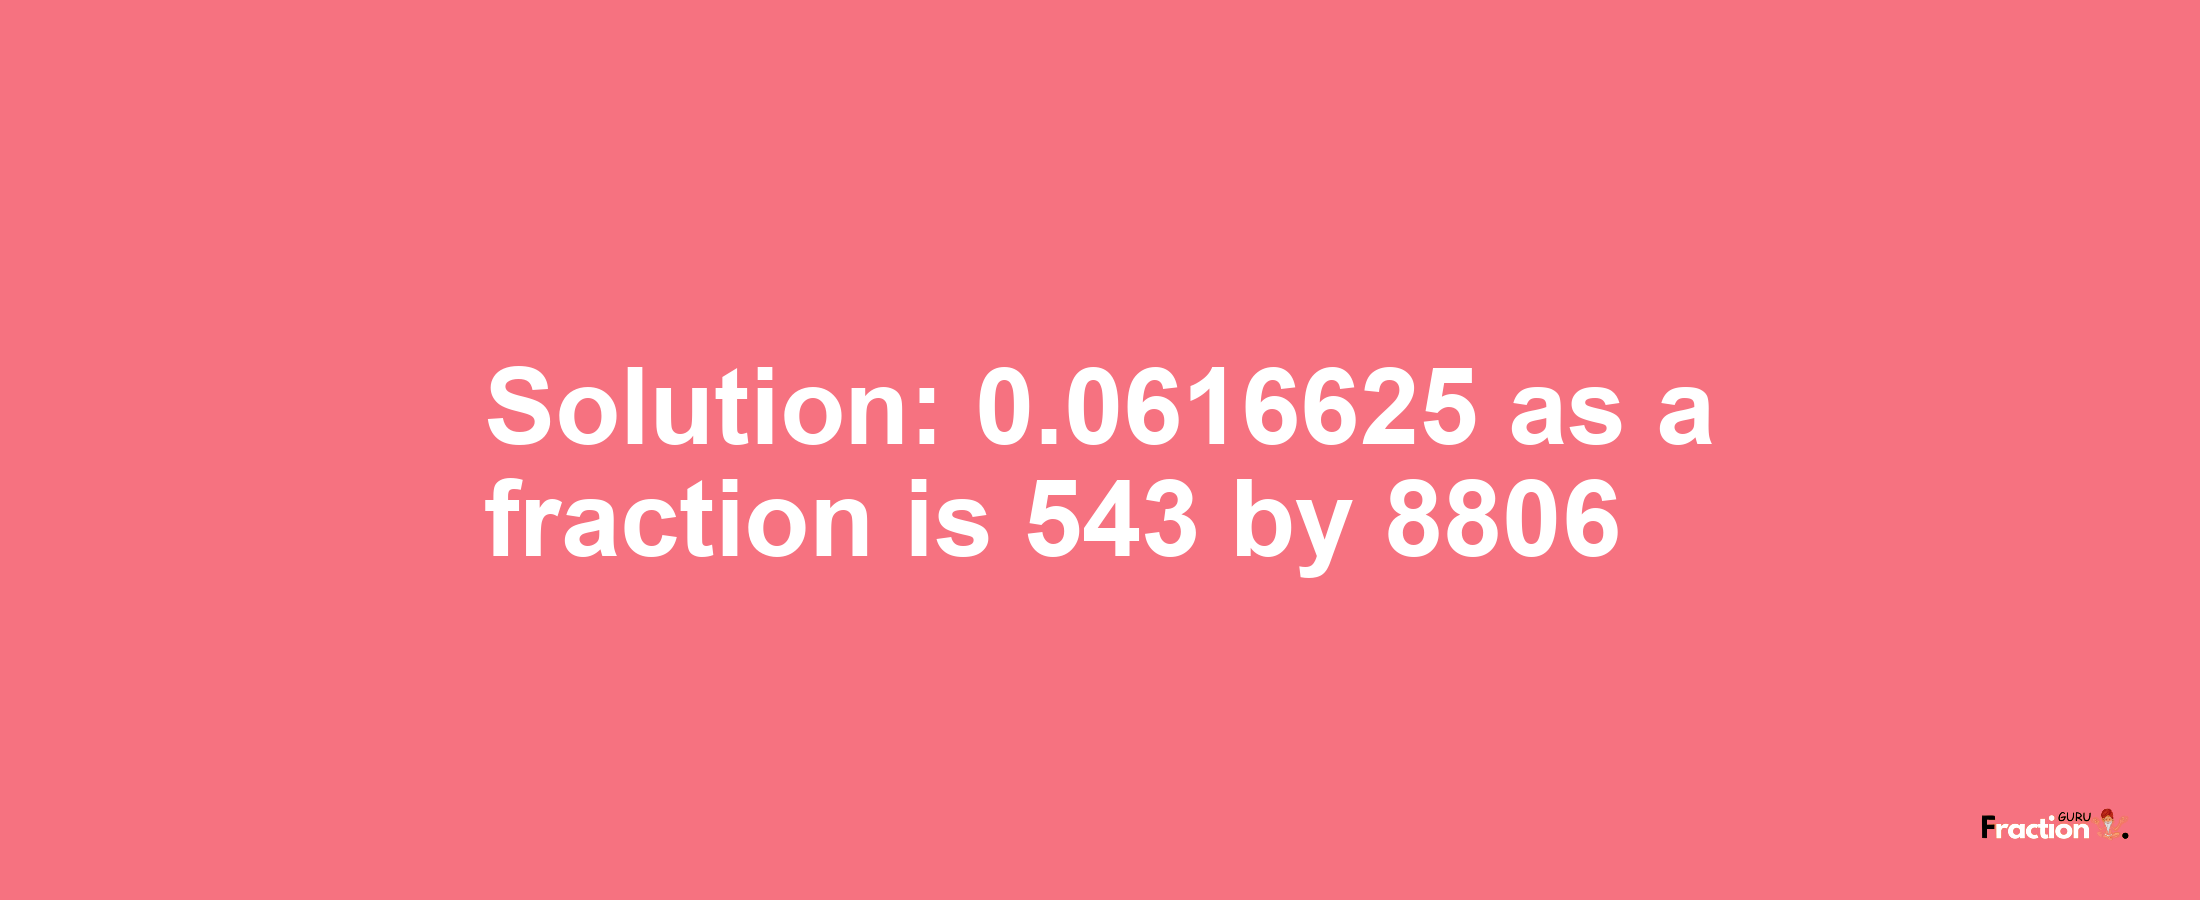 Solution:0.0616625 as a fraction is 543/8806